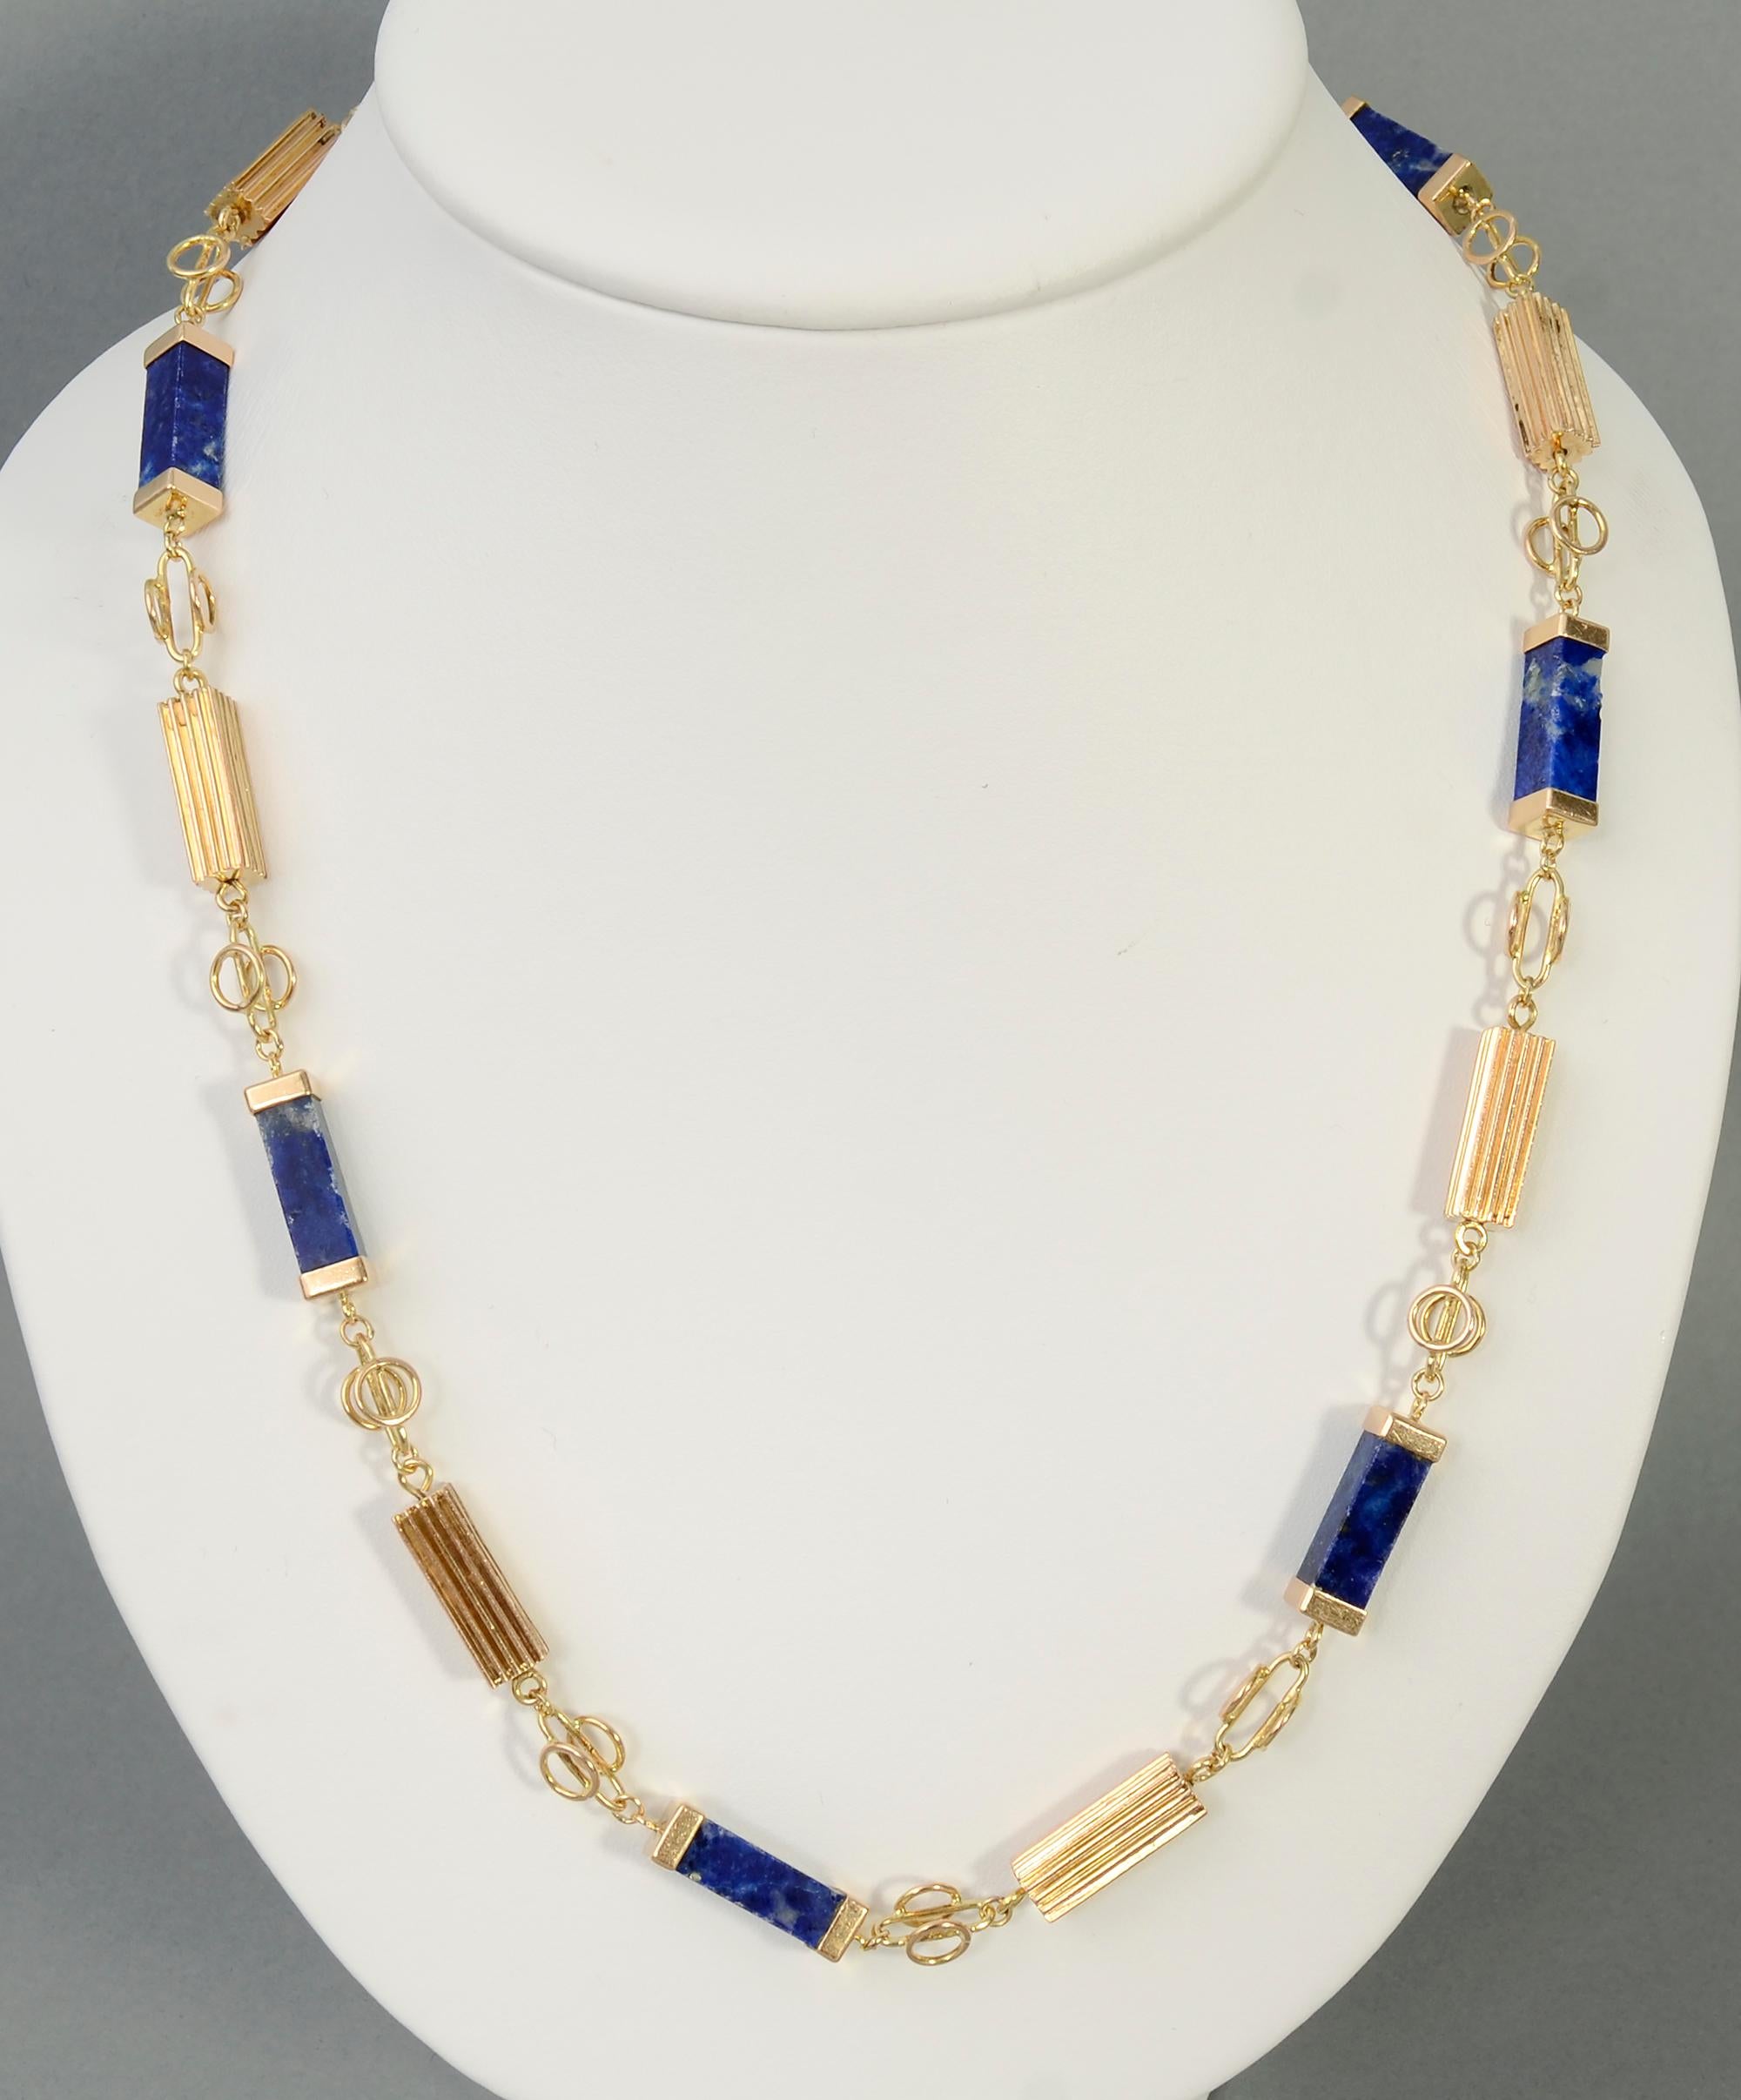 Handmade Retro long gold chain necklace with rectangles of lapis lazuli. Circles and ovals make for an interesting gold link. Each piece of lapis is 1/4